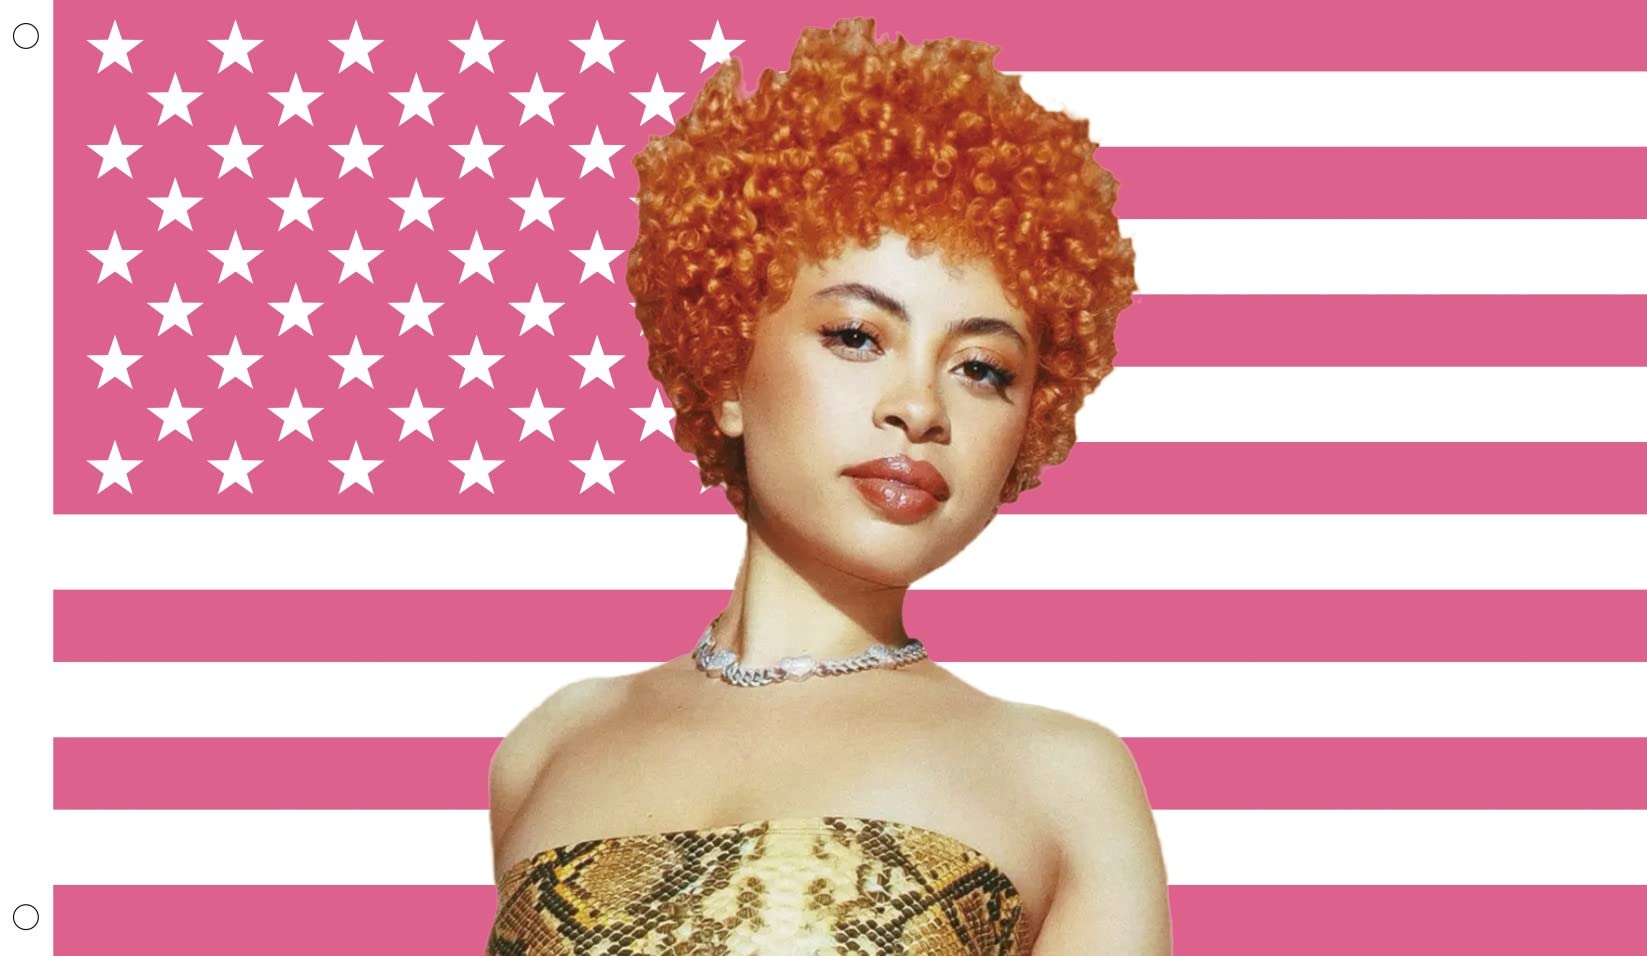 A portrait of Aaliyah, a Black woman with a short, curly orange afro, wearing a snakeskin tube top and a chunky necklace. She is standing in front of a pink flag with white stars. - Ice Spice